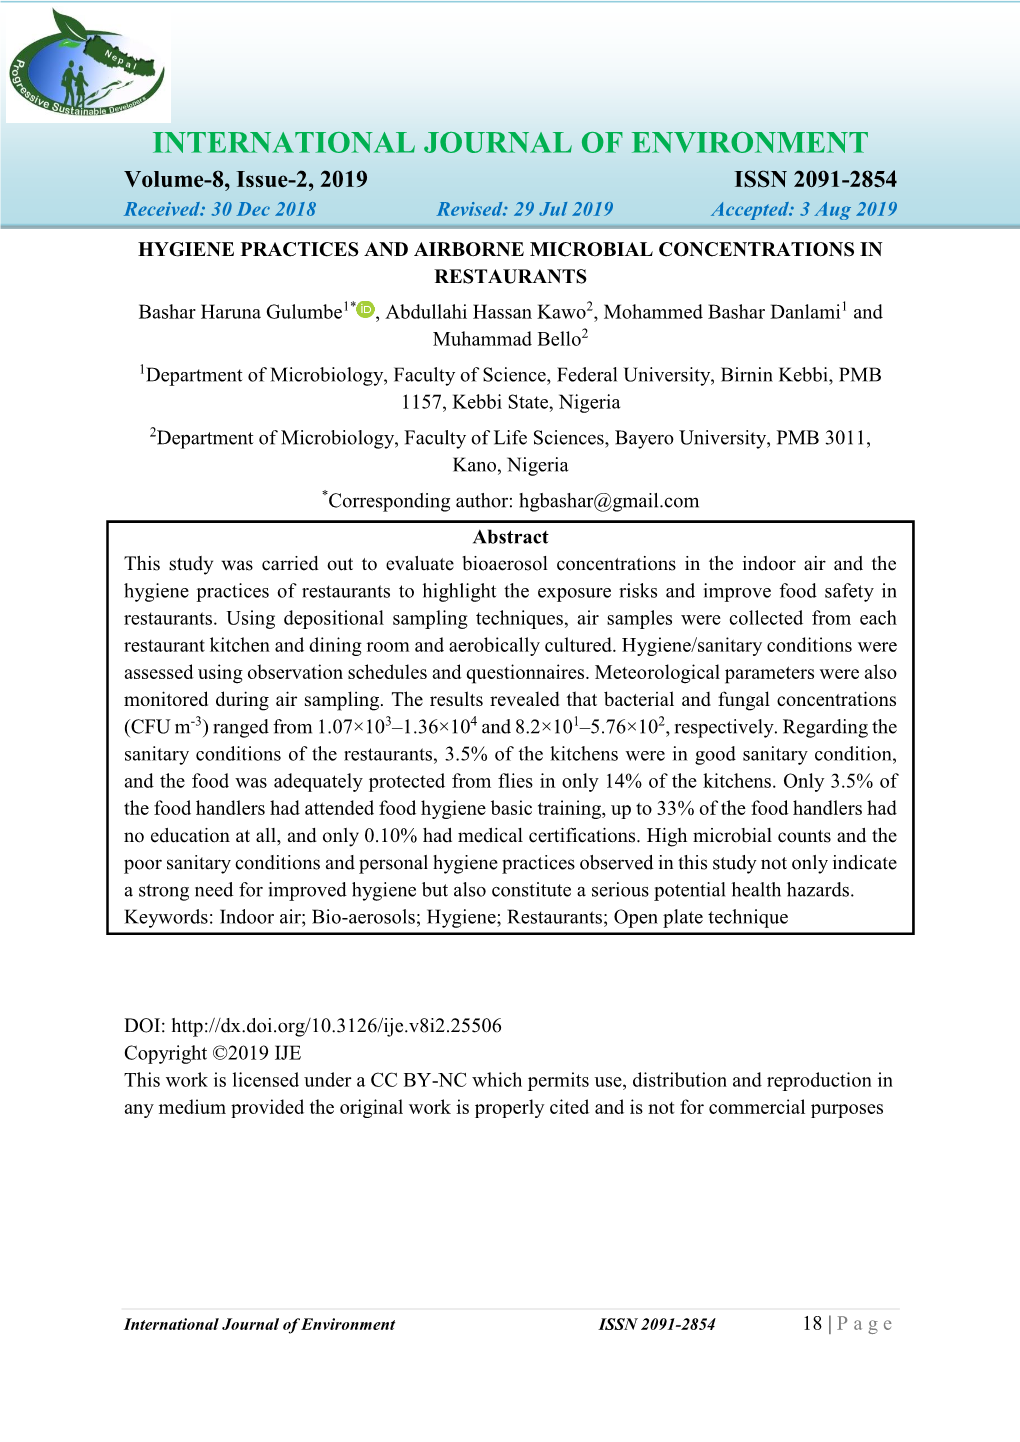 INTERNATIONAL JOURNAL of ENVIRONMENT Volume-8, Issue-2, 2019 ISSN 2091-2854 Received: 30 Dec 2018 Revised: 29 Jul 2019 Accepted: 3 Aug 2019